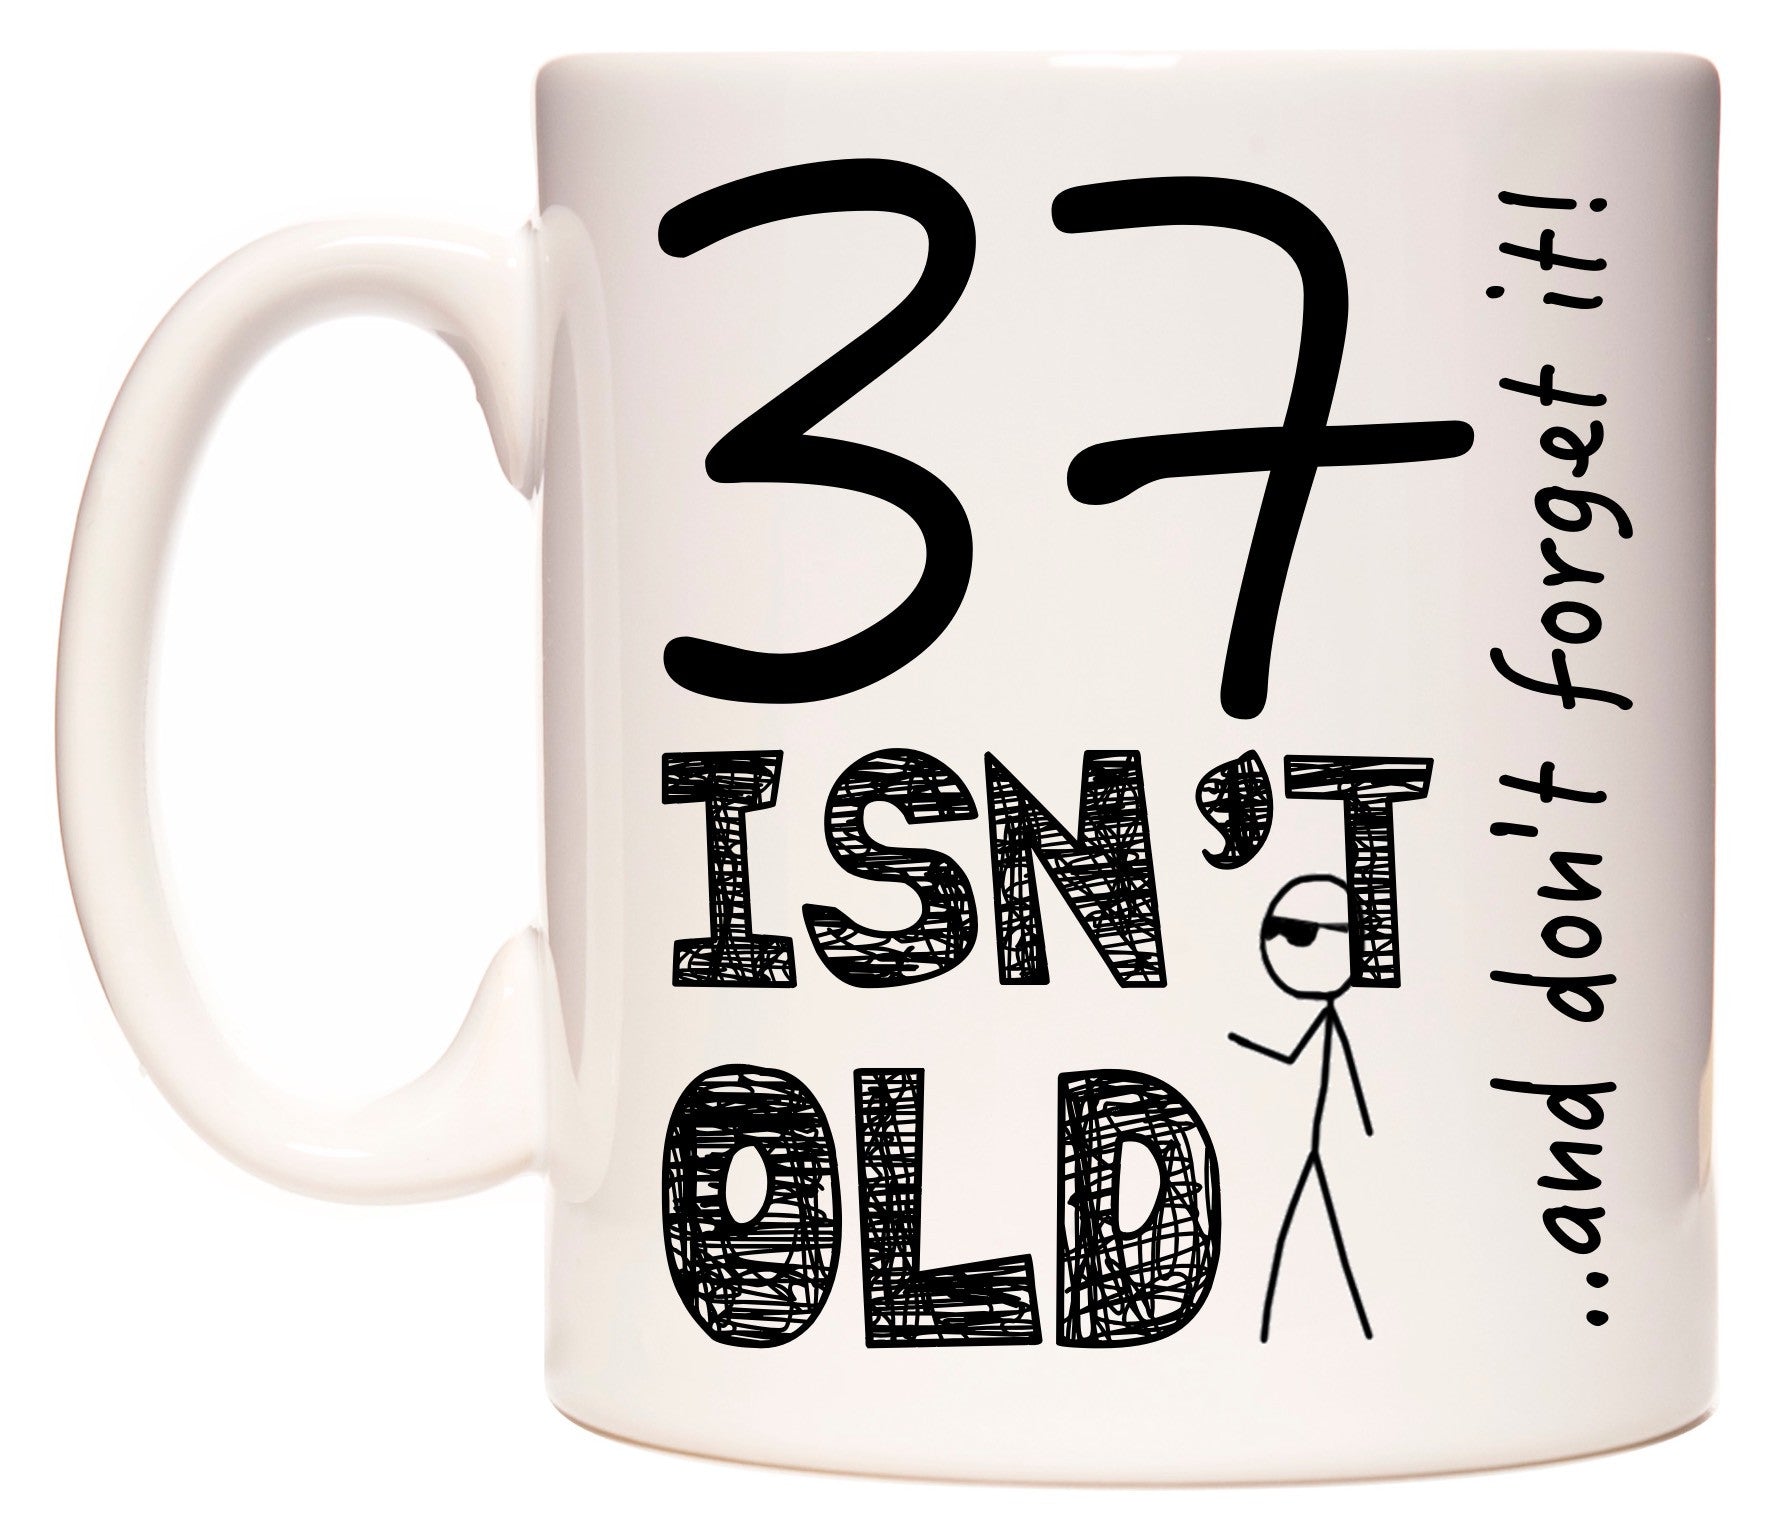 This mug features 37 Isn't Old